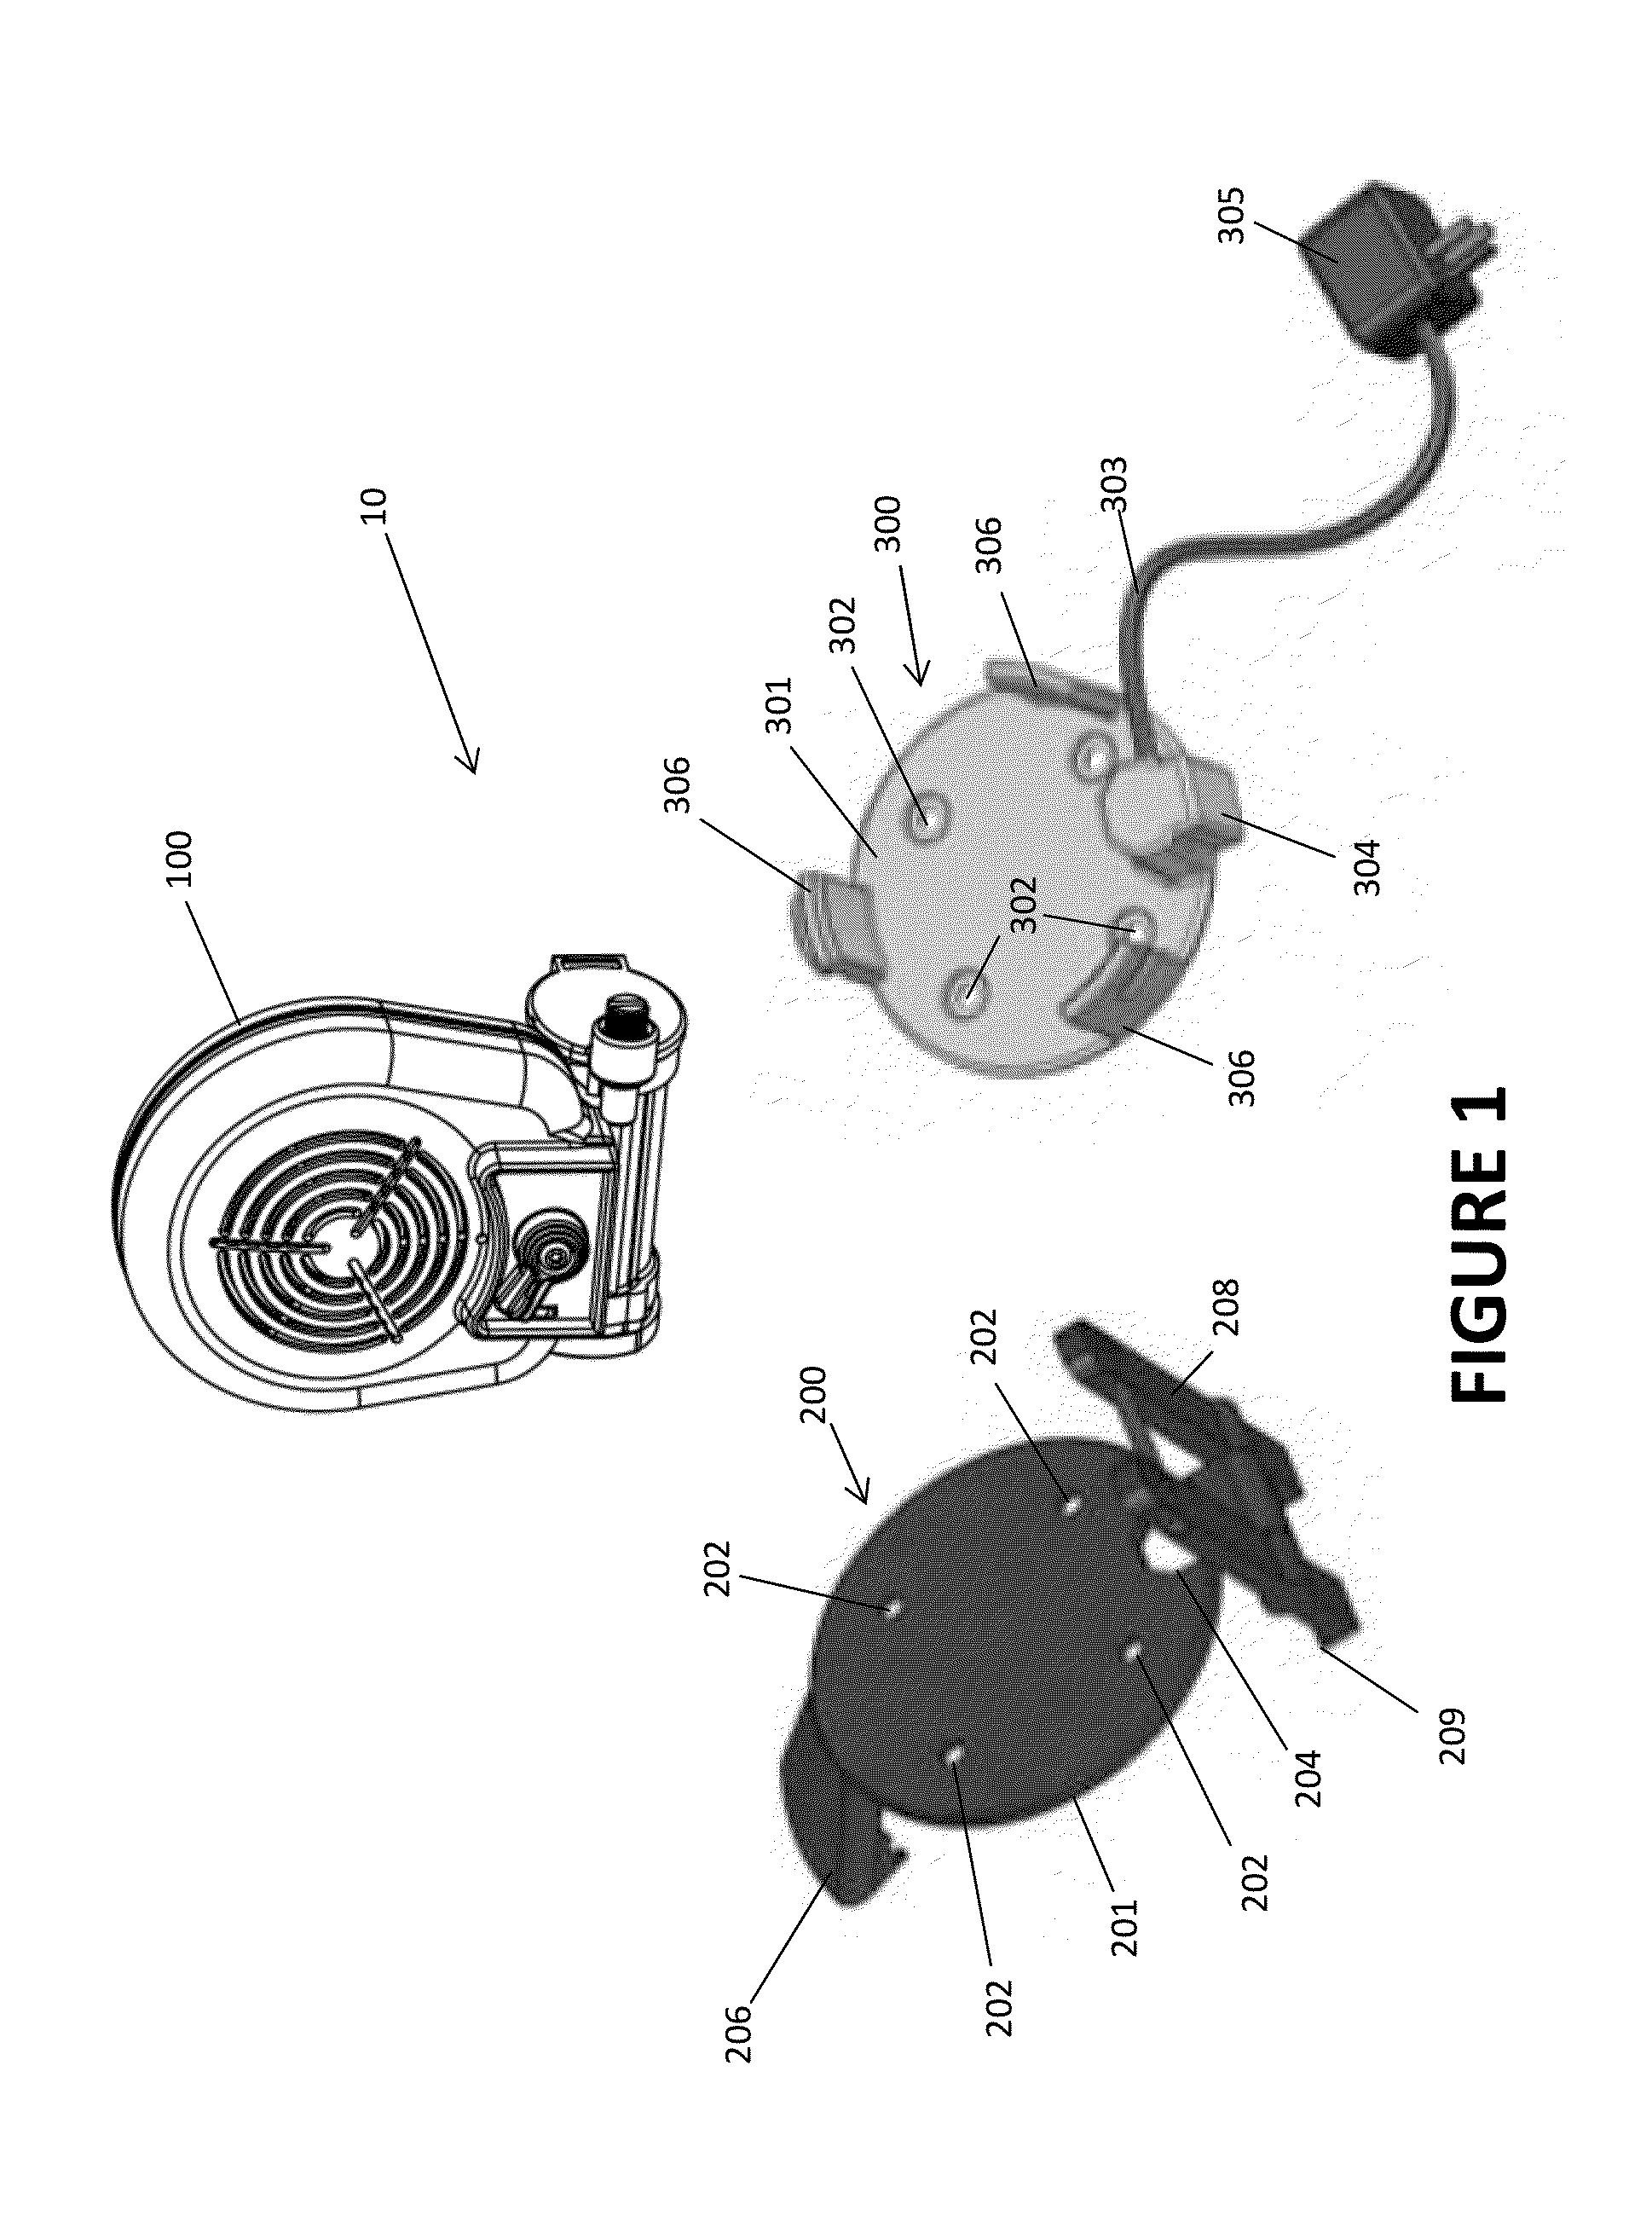 Modular voice amplification system for protective mask